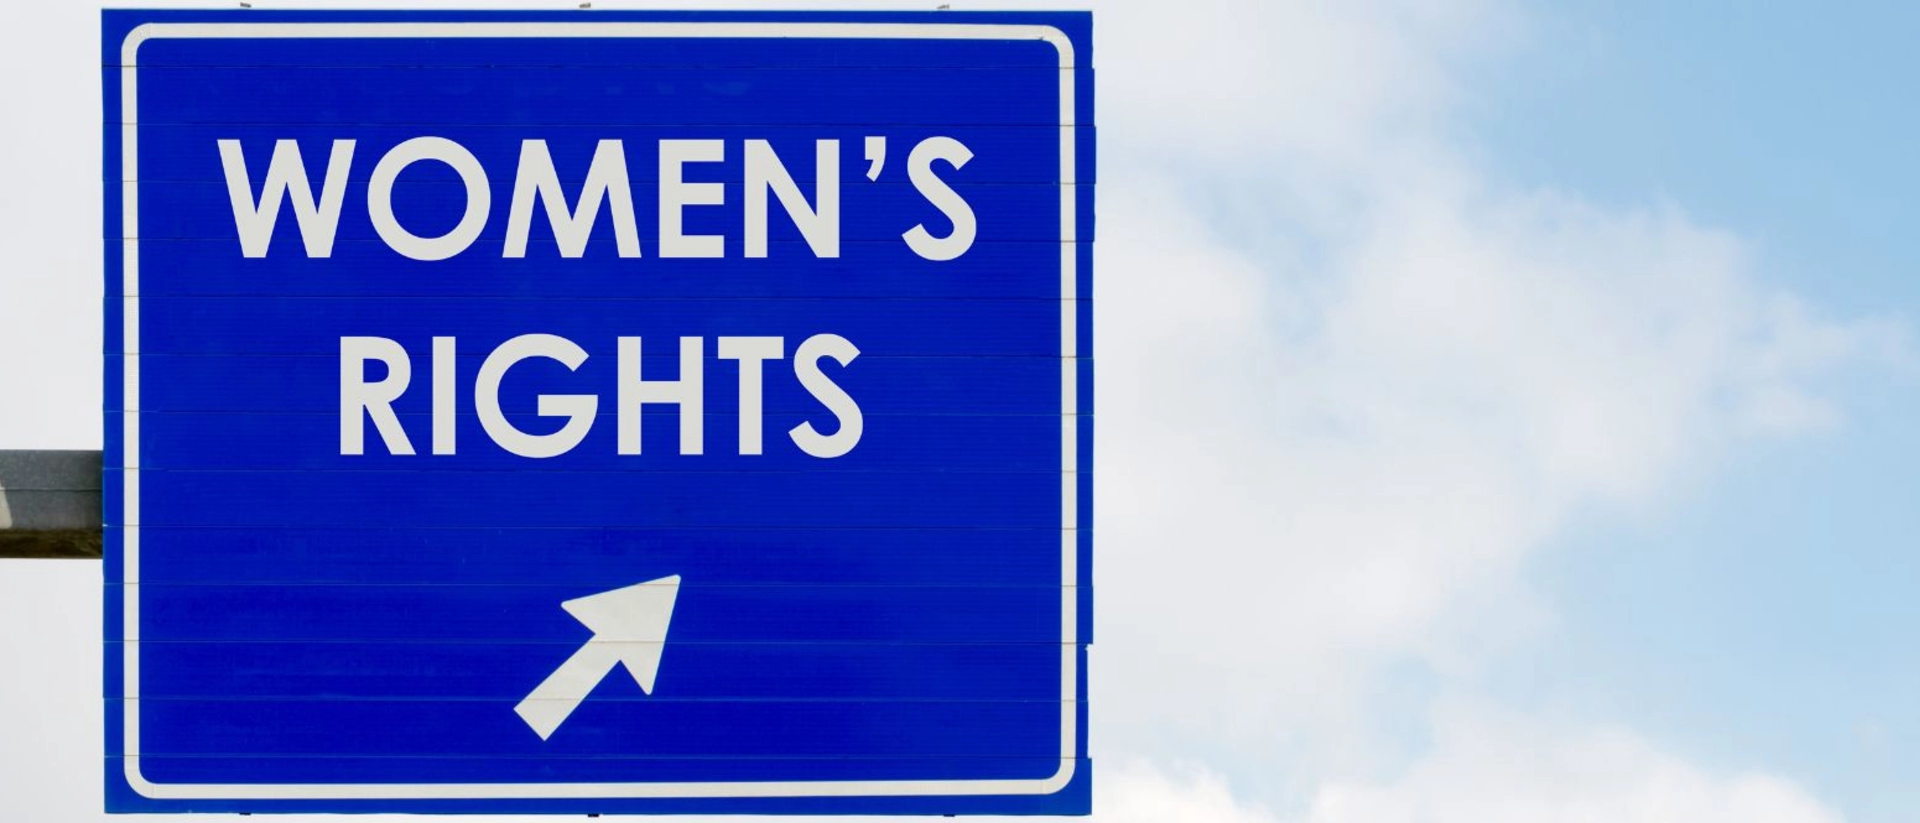 Stock photo of a dark blue freeway sign with the words, "Women's Right's" and an arrow in white. The sign is front of a blue sky with clouds.